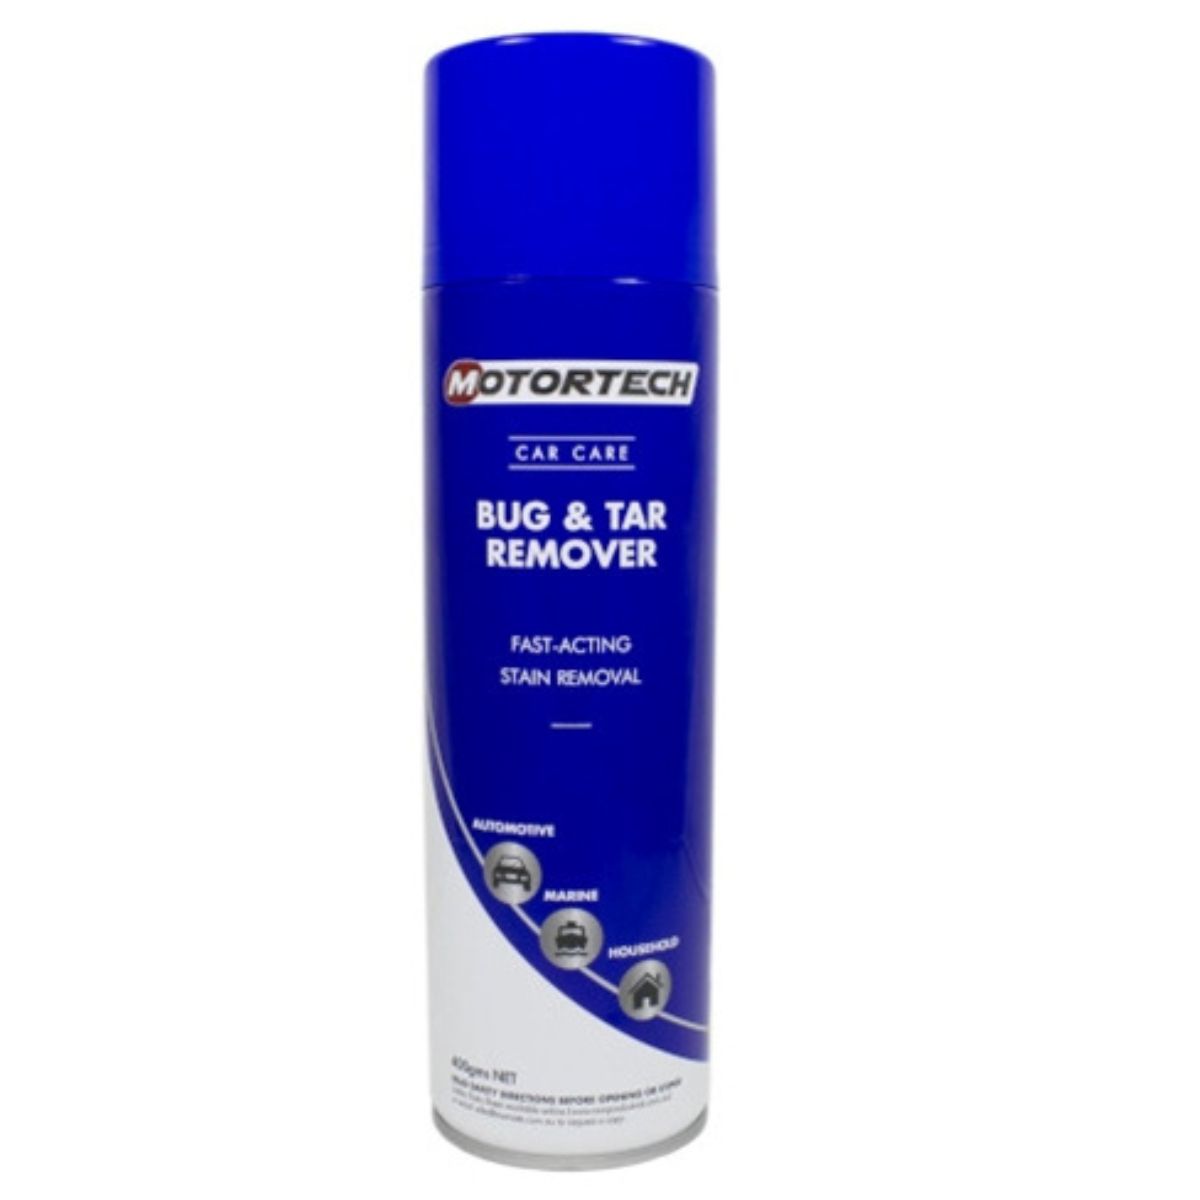 Motortech Bug & Tar Remover - South East Clearance Centre